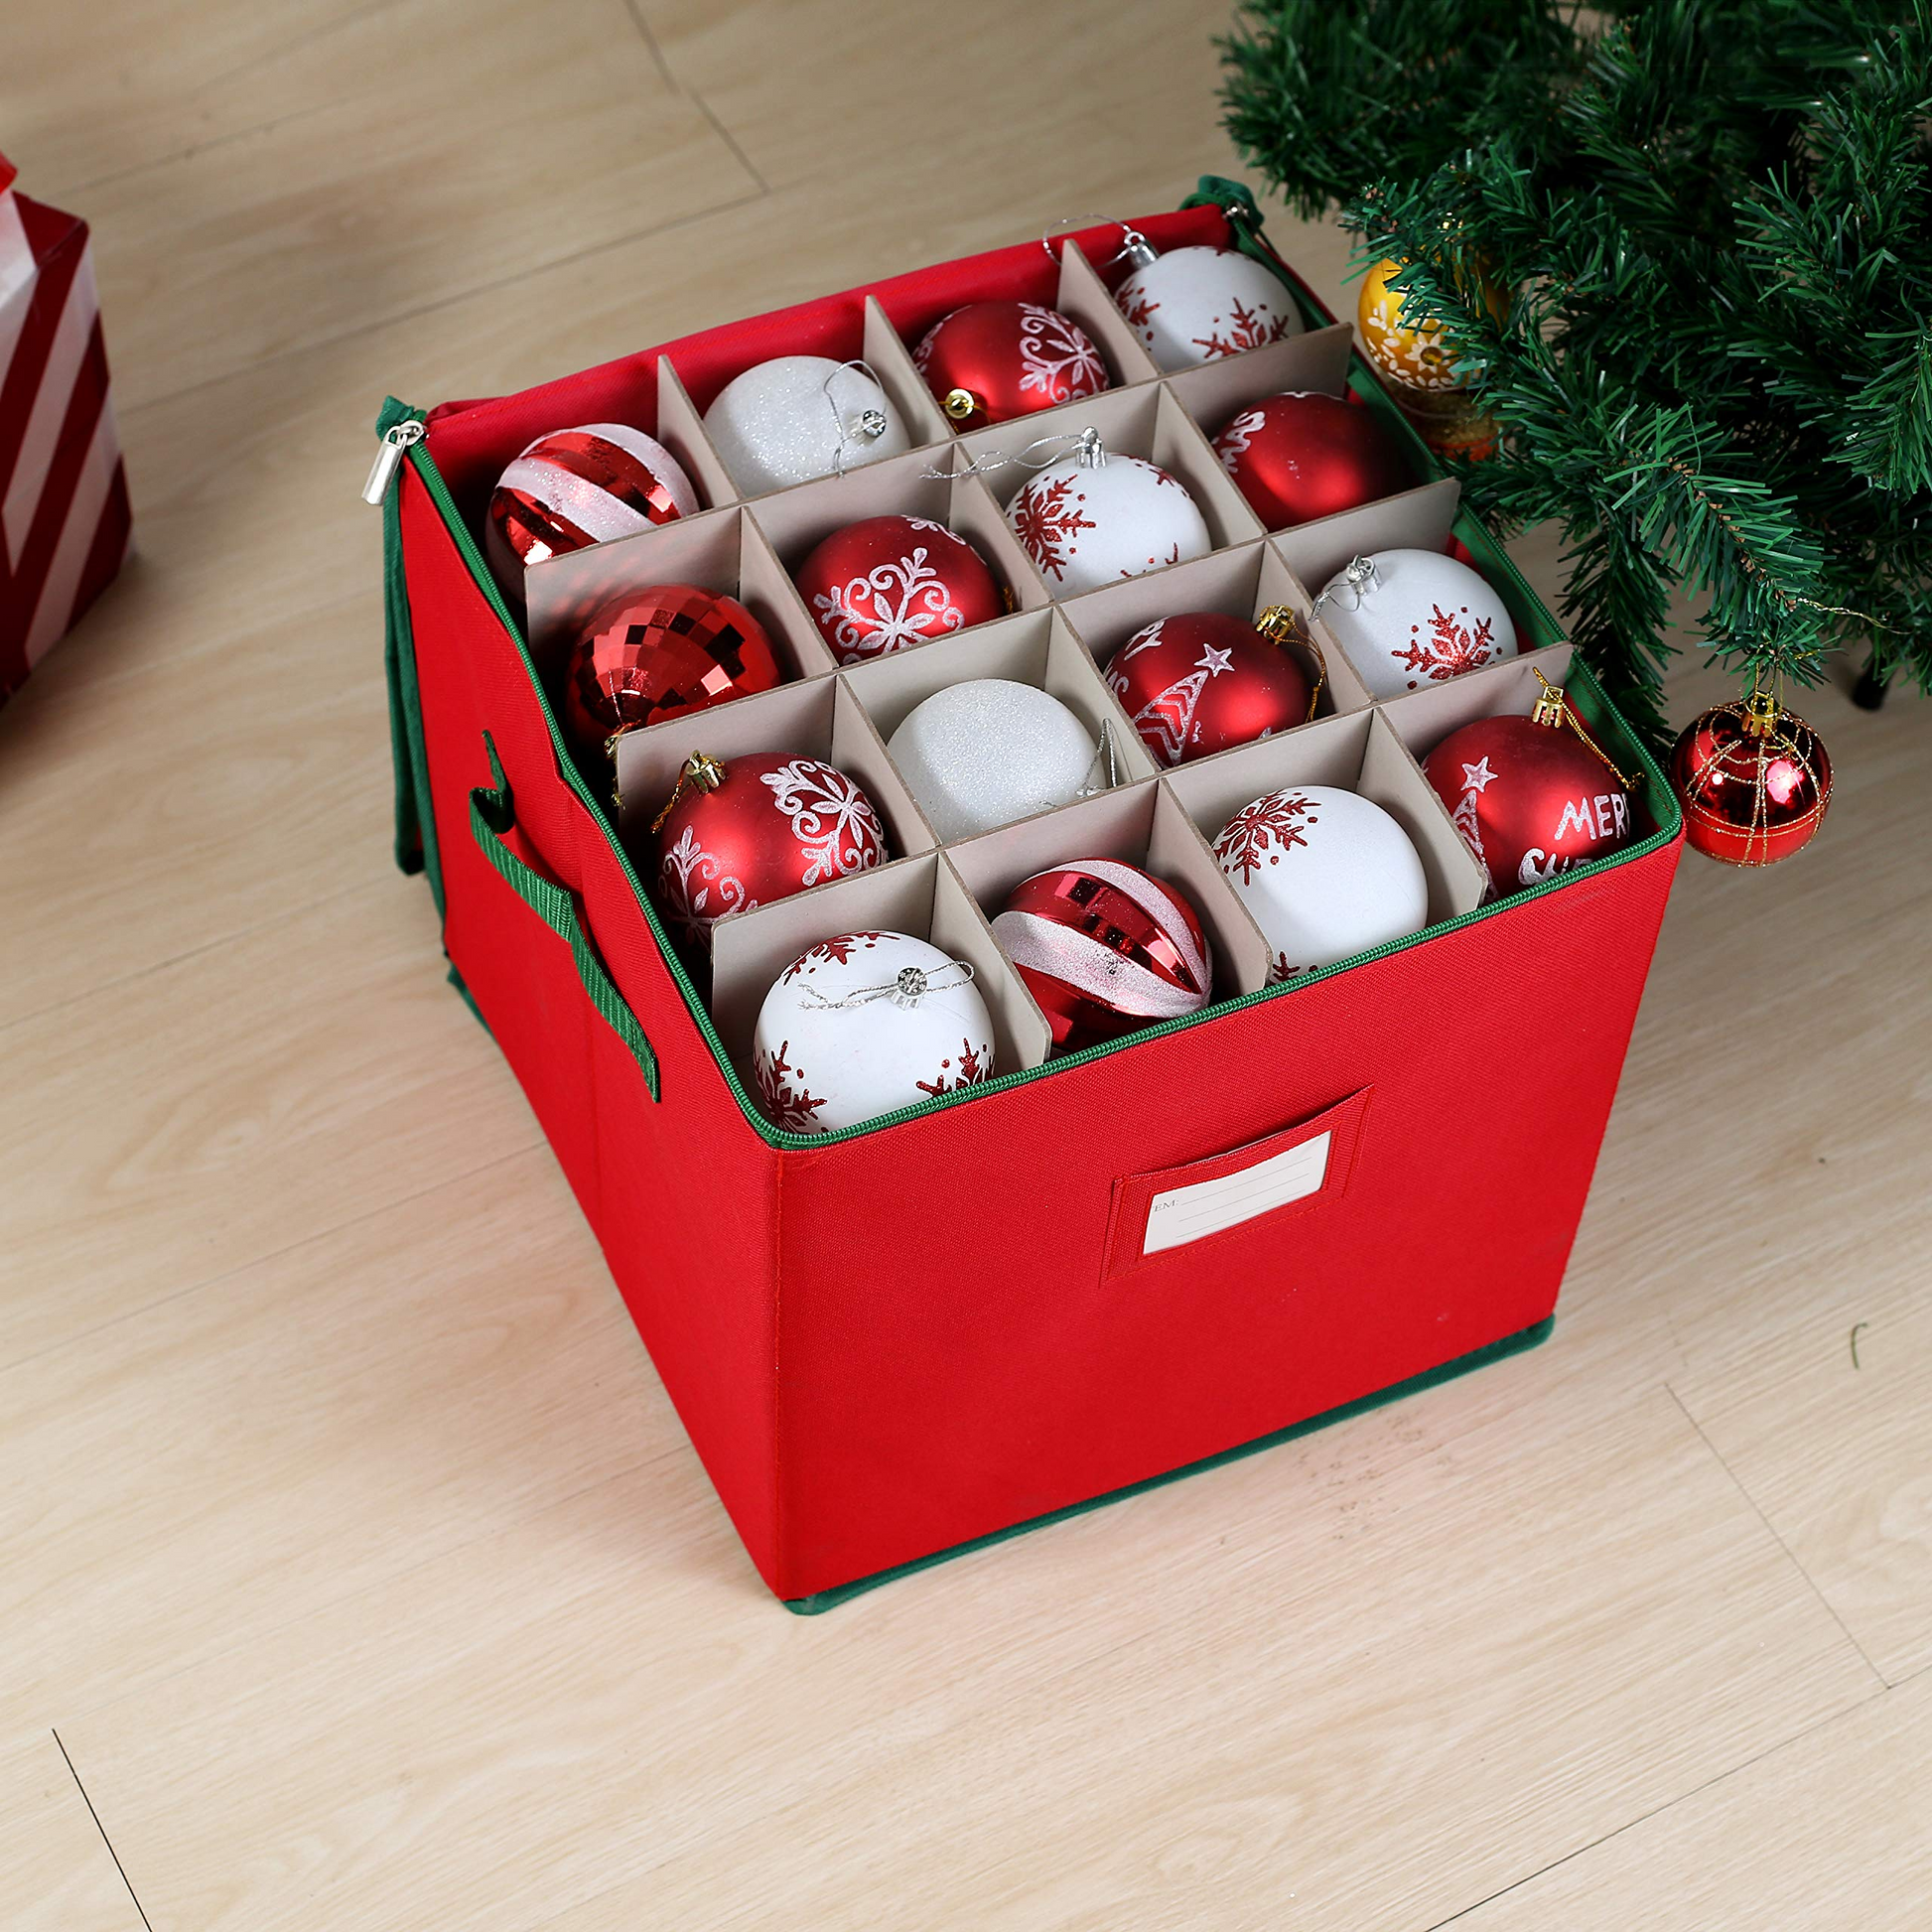 Glomery Christmas Ornament Box, Adjustable Dividers Stores Up to 64 Ornaments - Red Stars